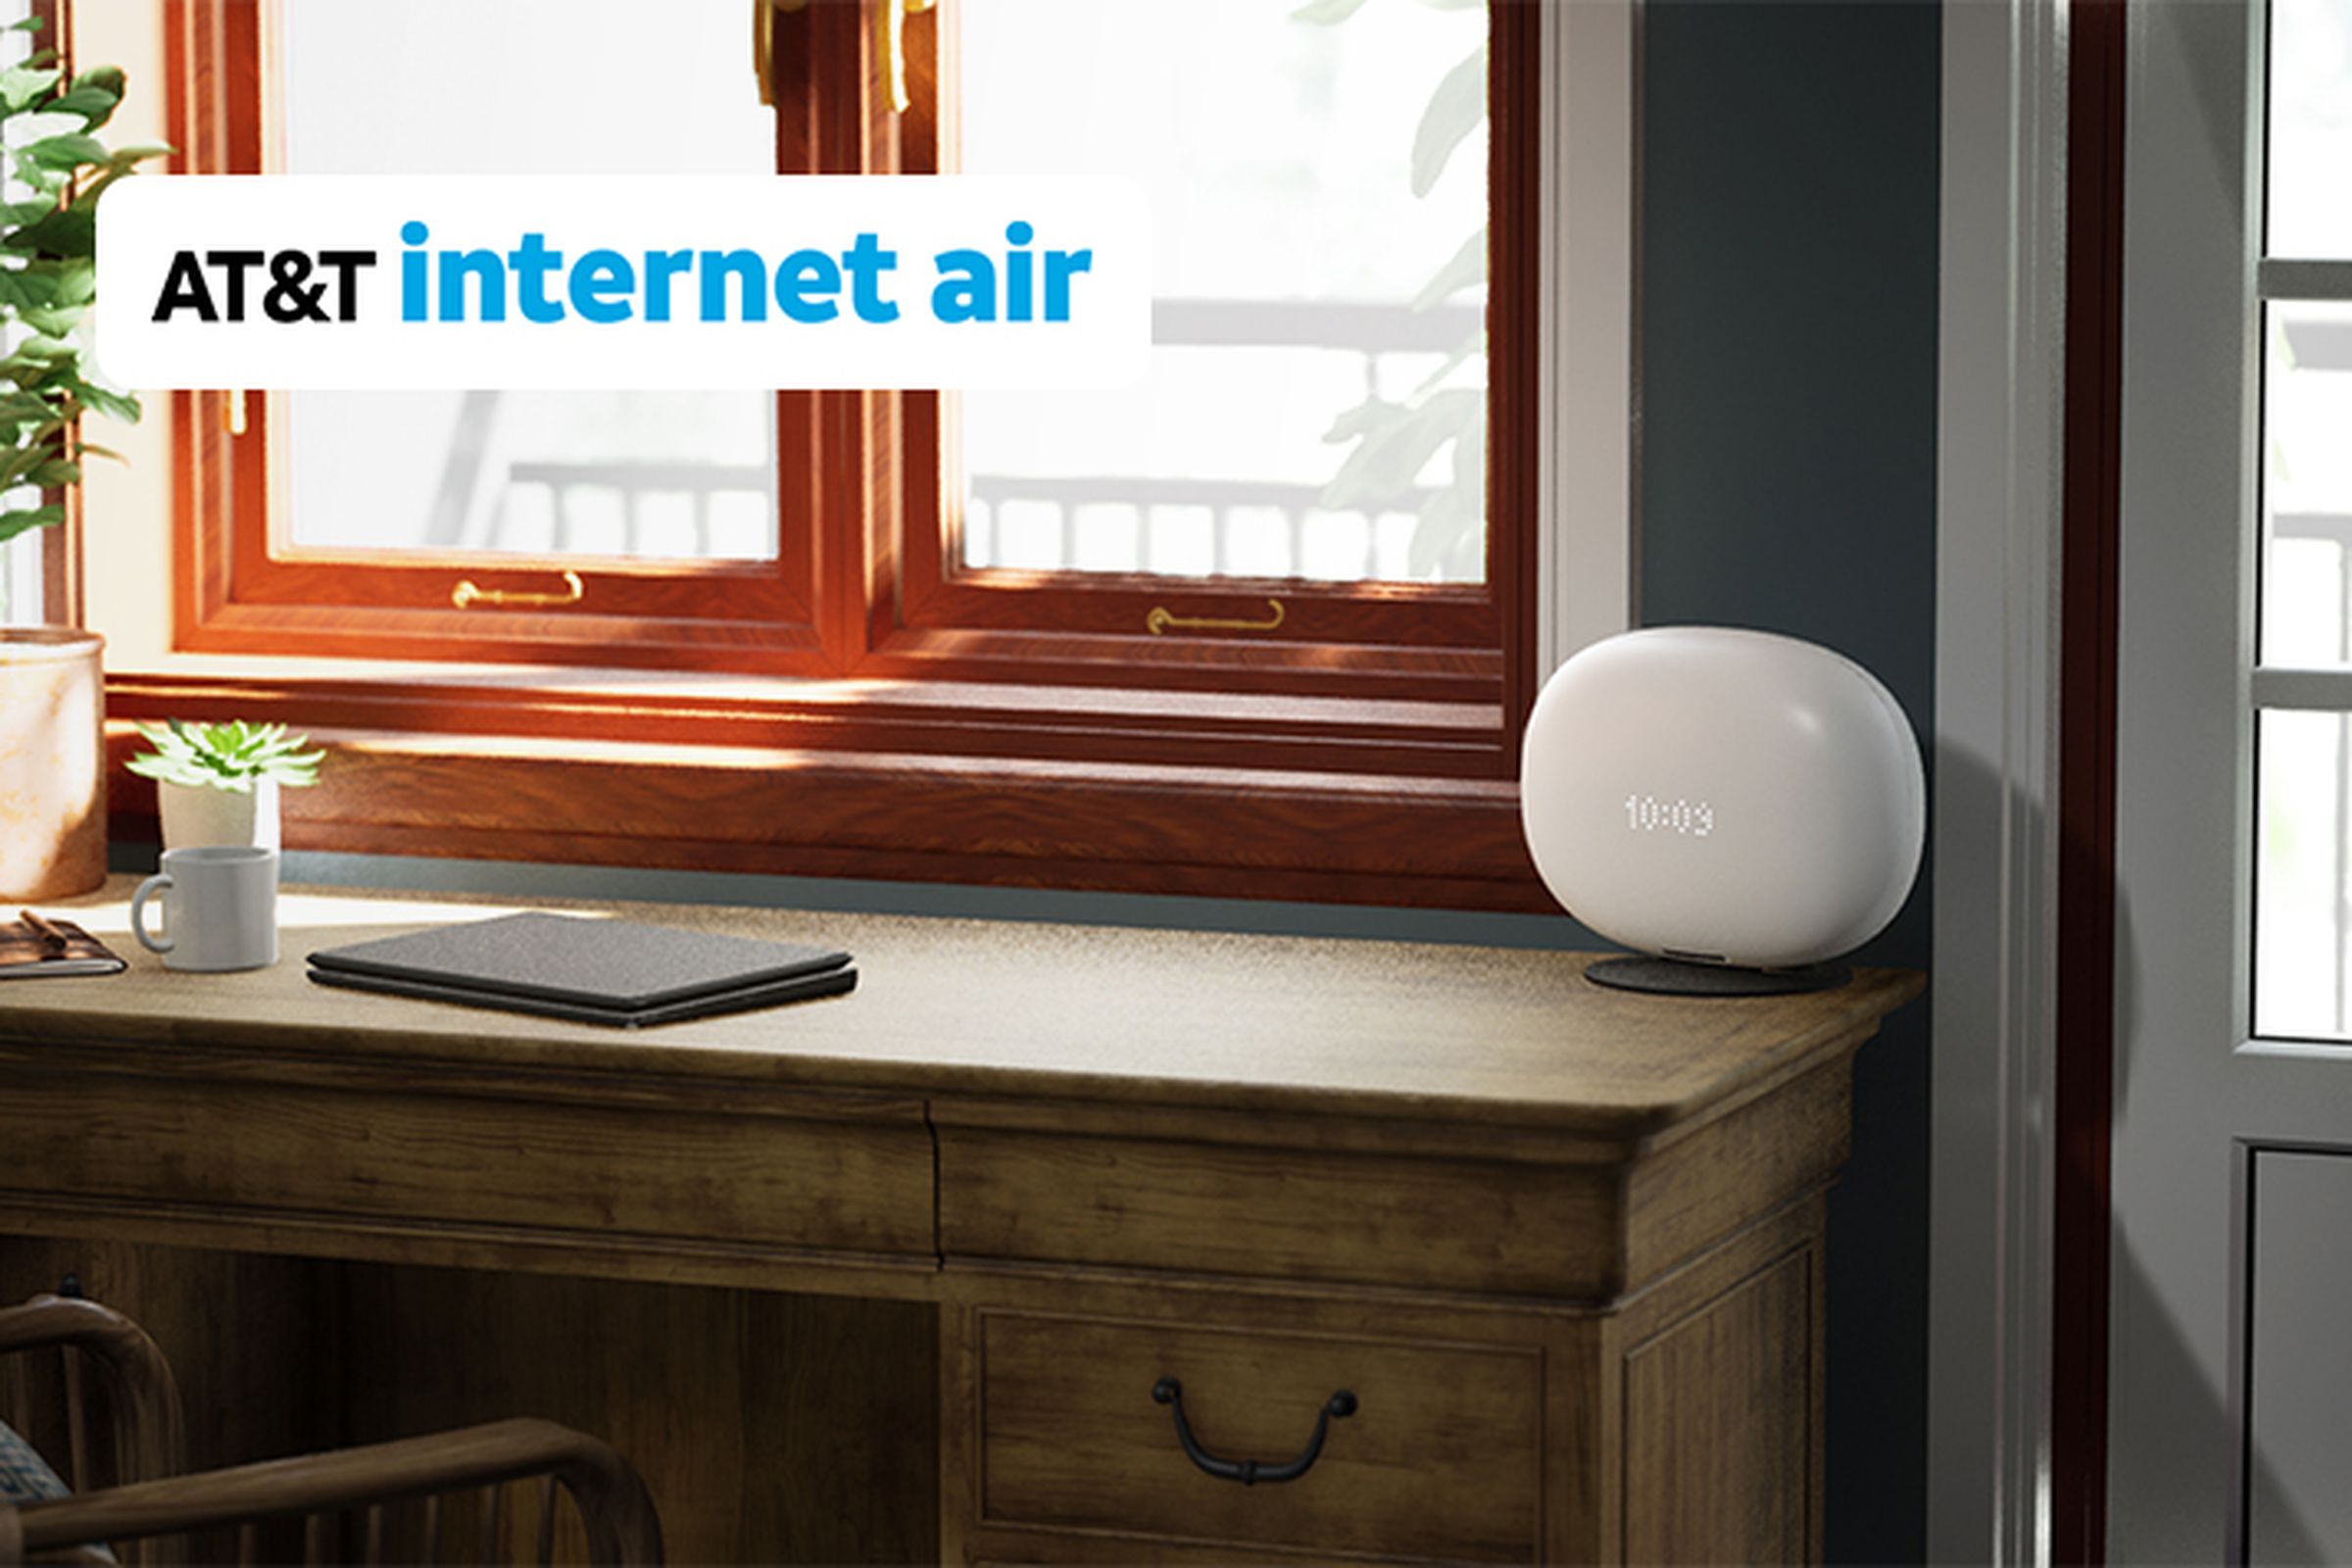 A photo showing an Internet Air device on a desk